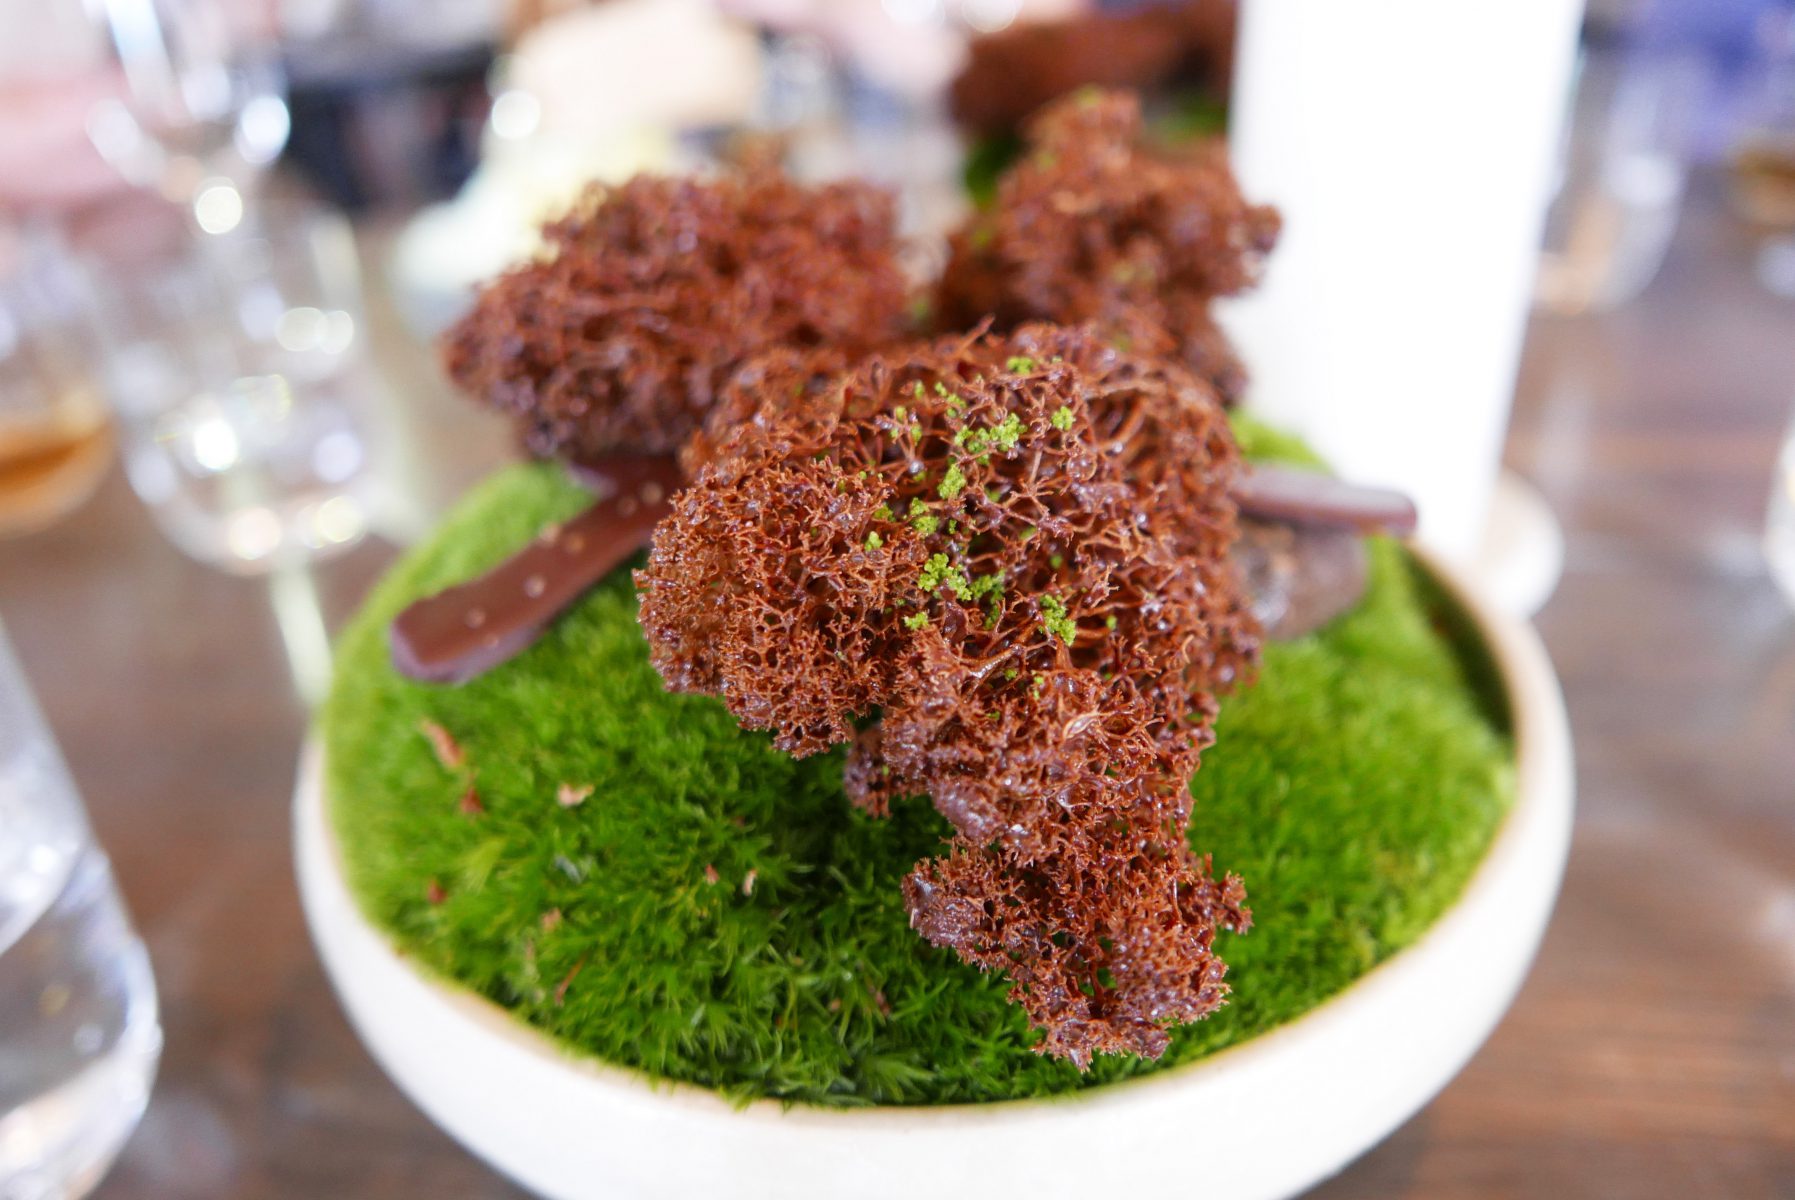 Moss cooked in chocolate